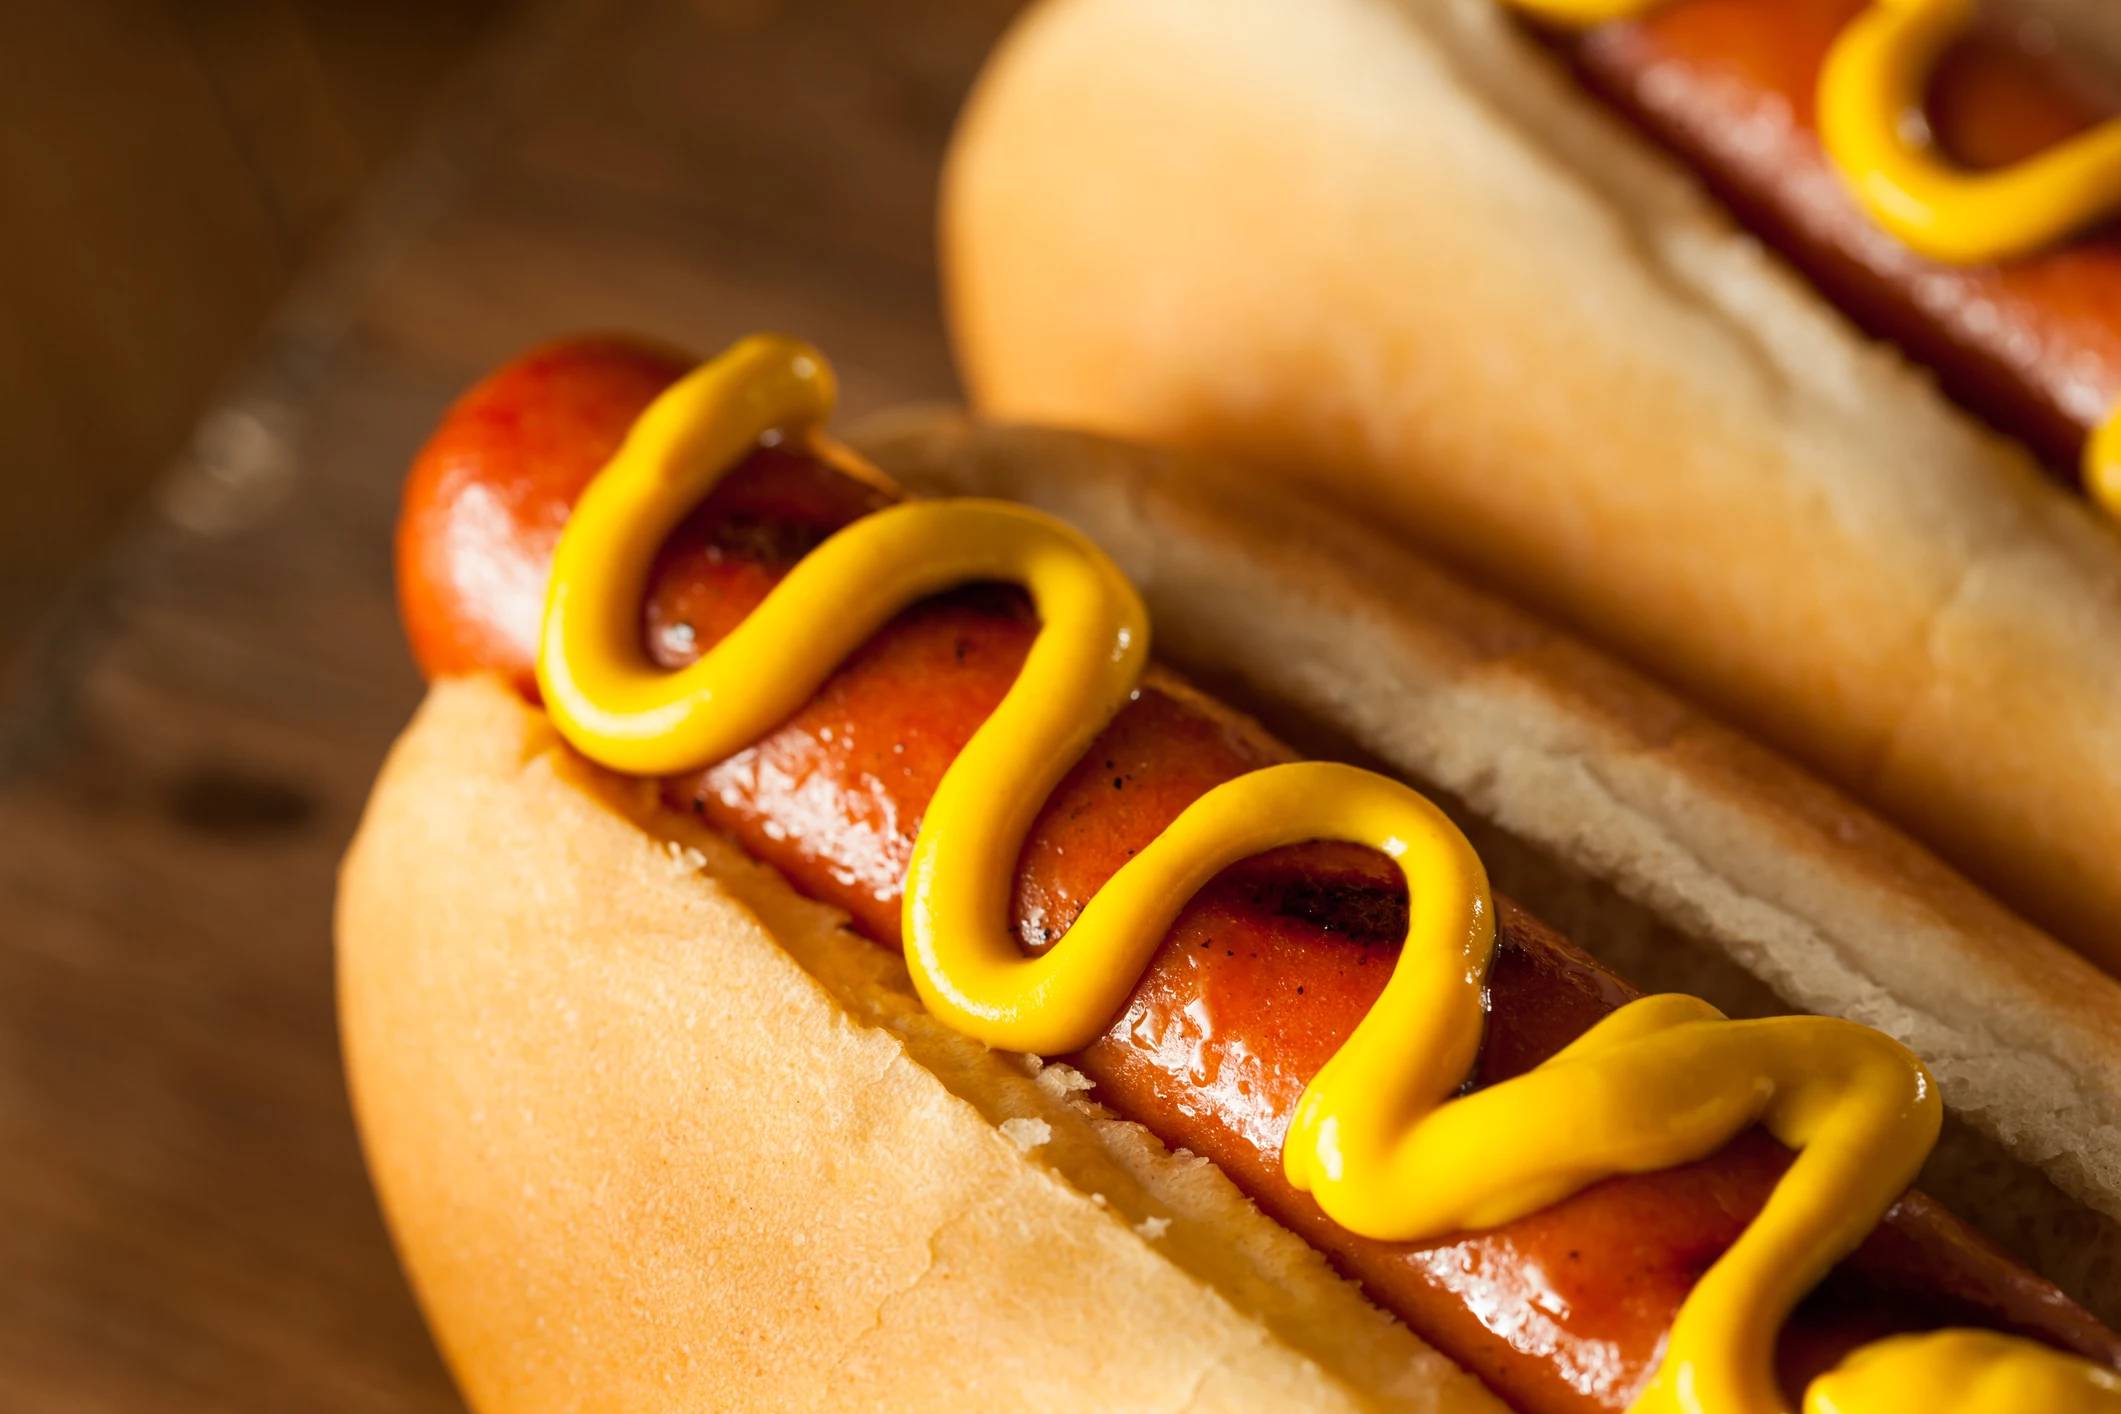 The 7 Best Hot Dog Joints in Connecticut!